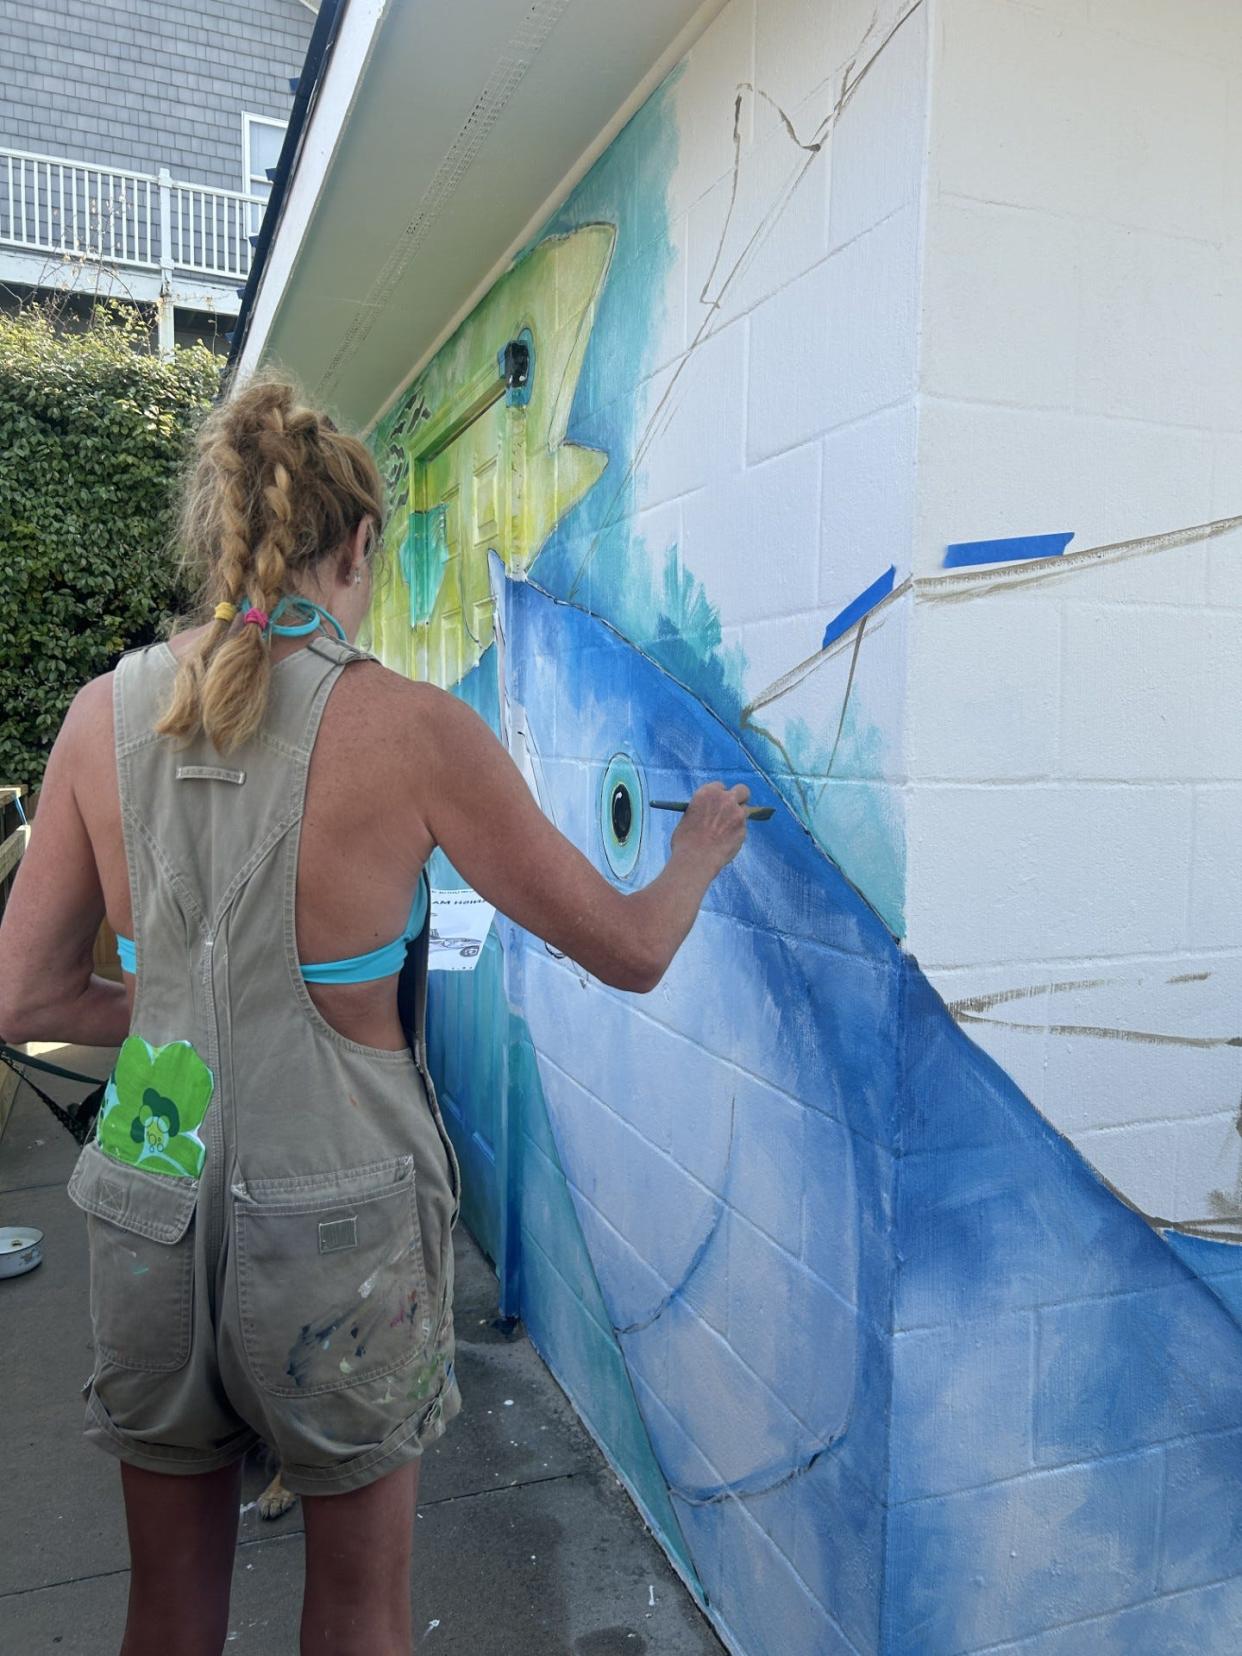 'A Day at the Beach' mural created by North Carolina based artist, Jennifer Wood.